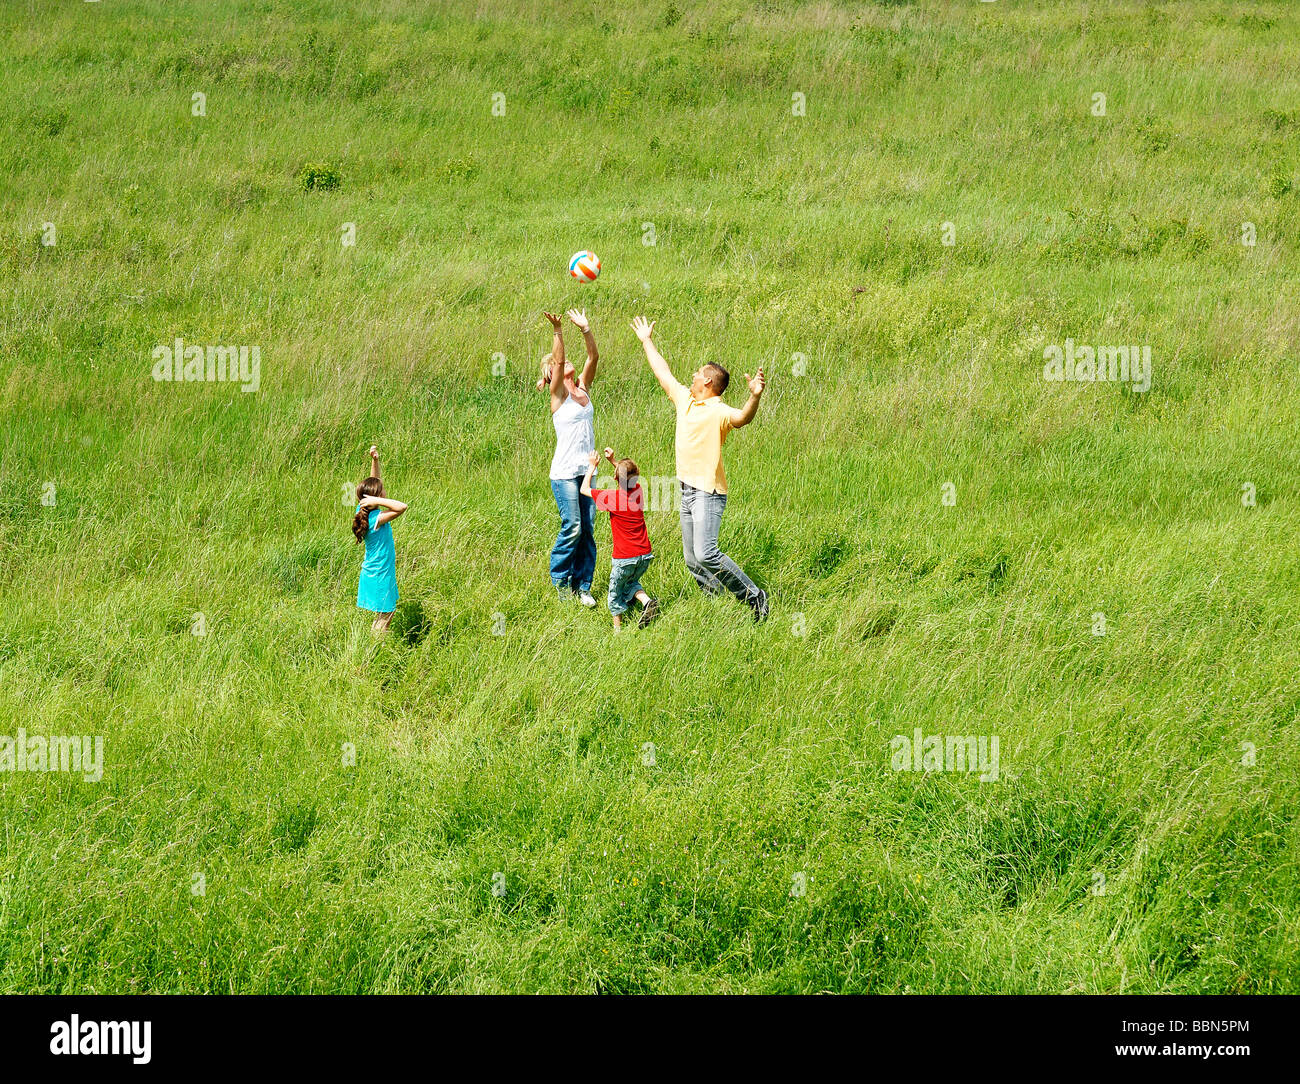 A family playing in a field with a ball Stock Photo